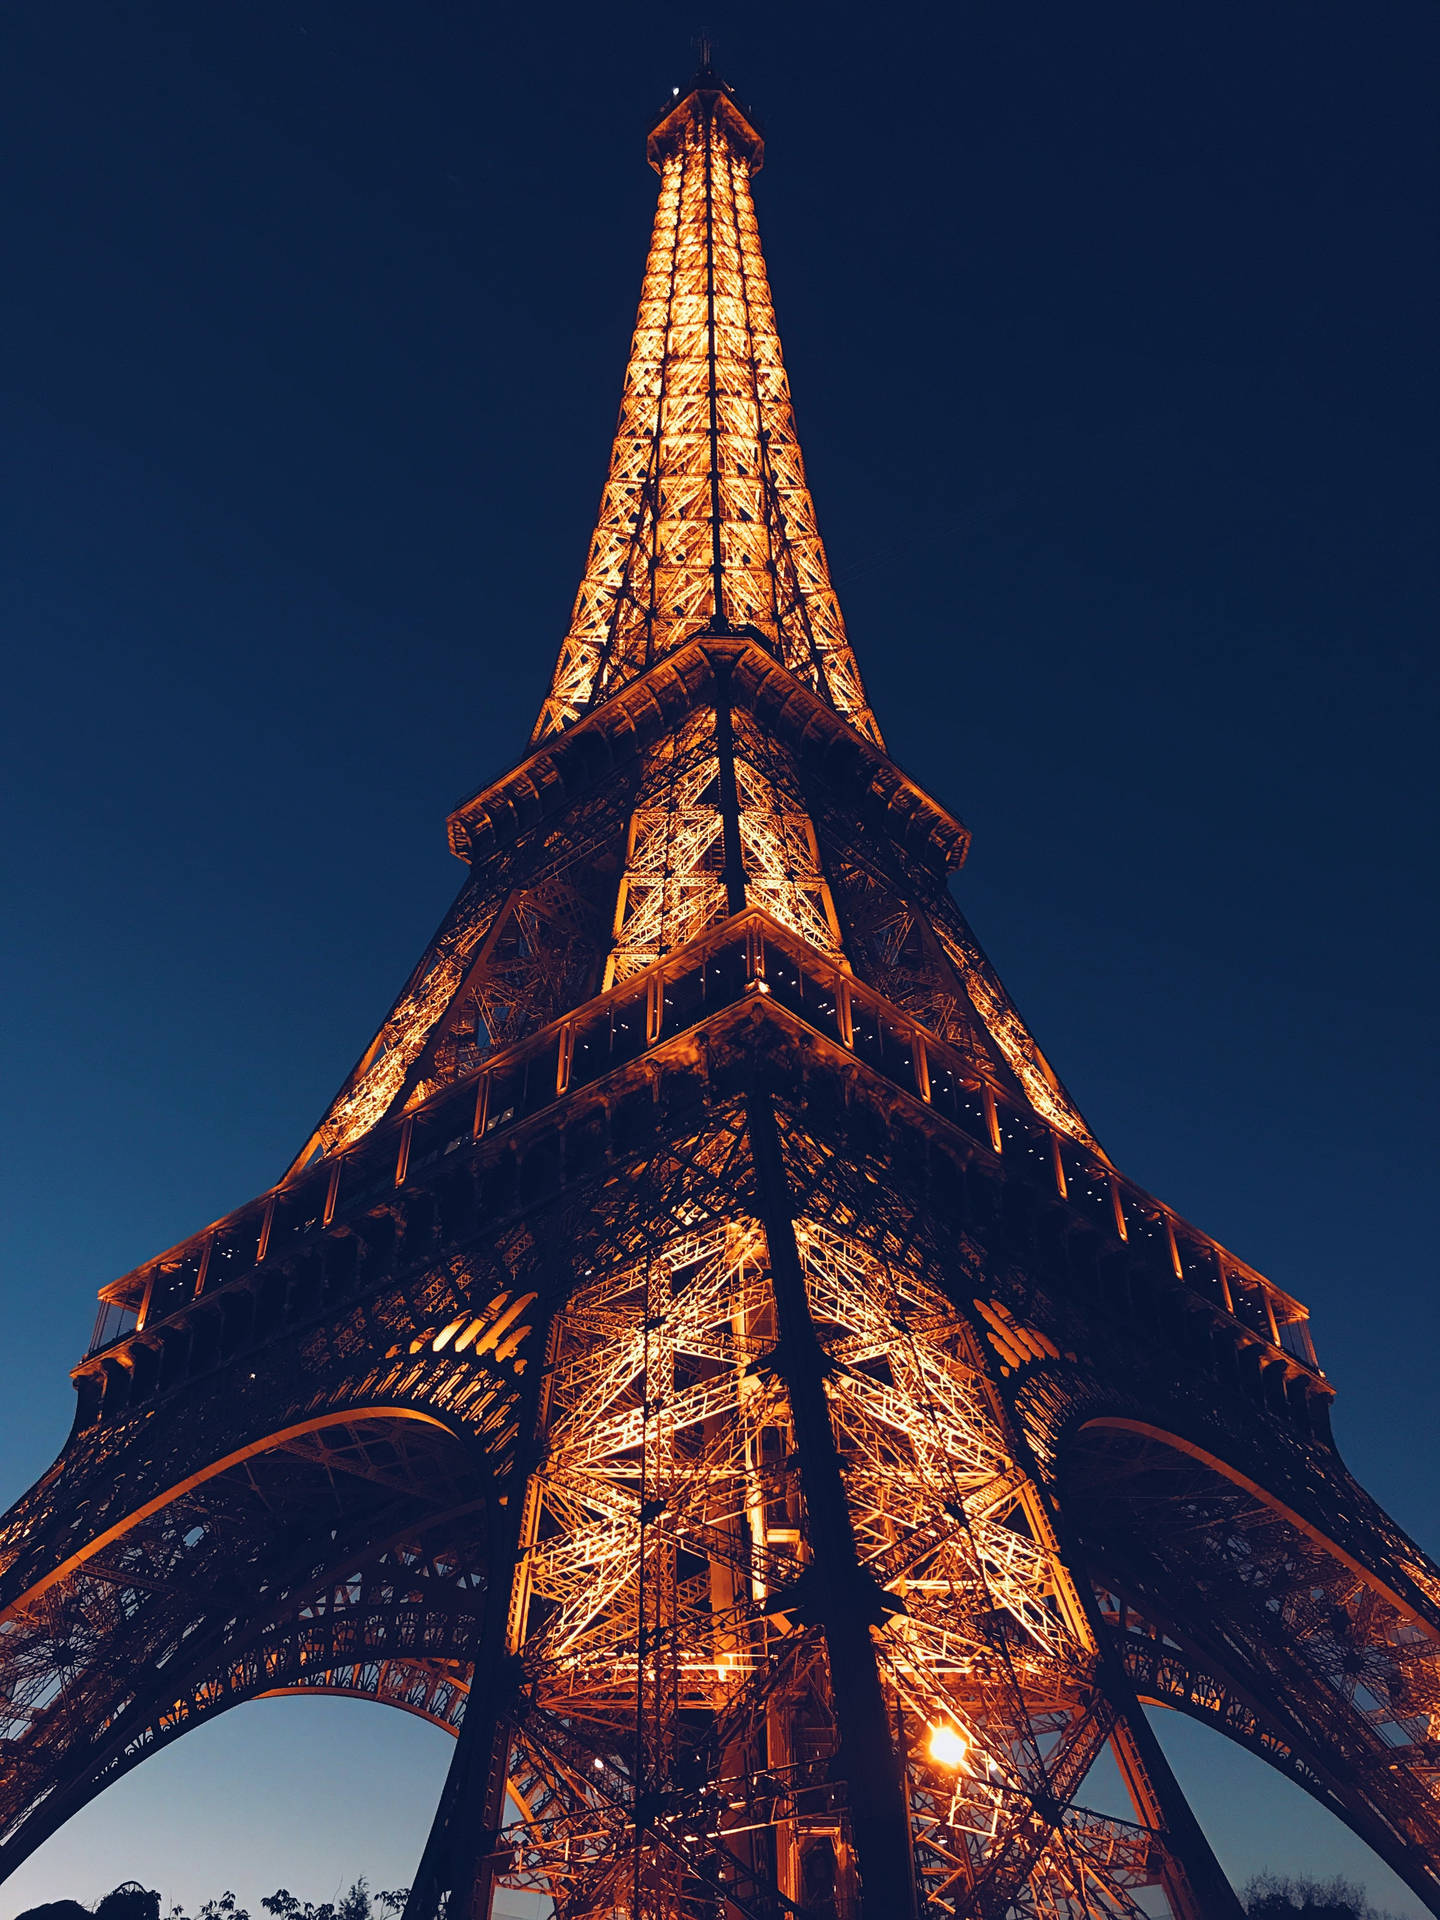 The Eiffel Tower Glittering In The Night